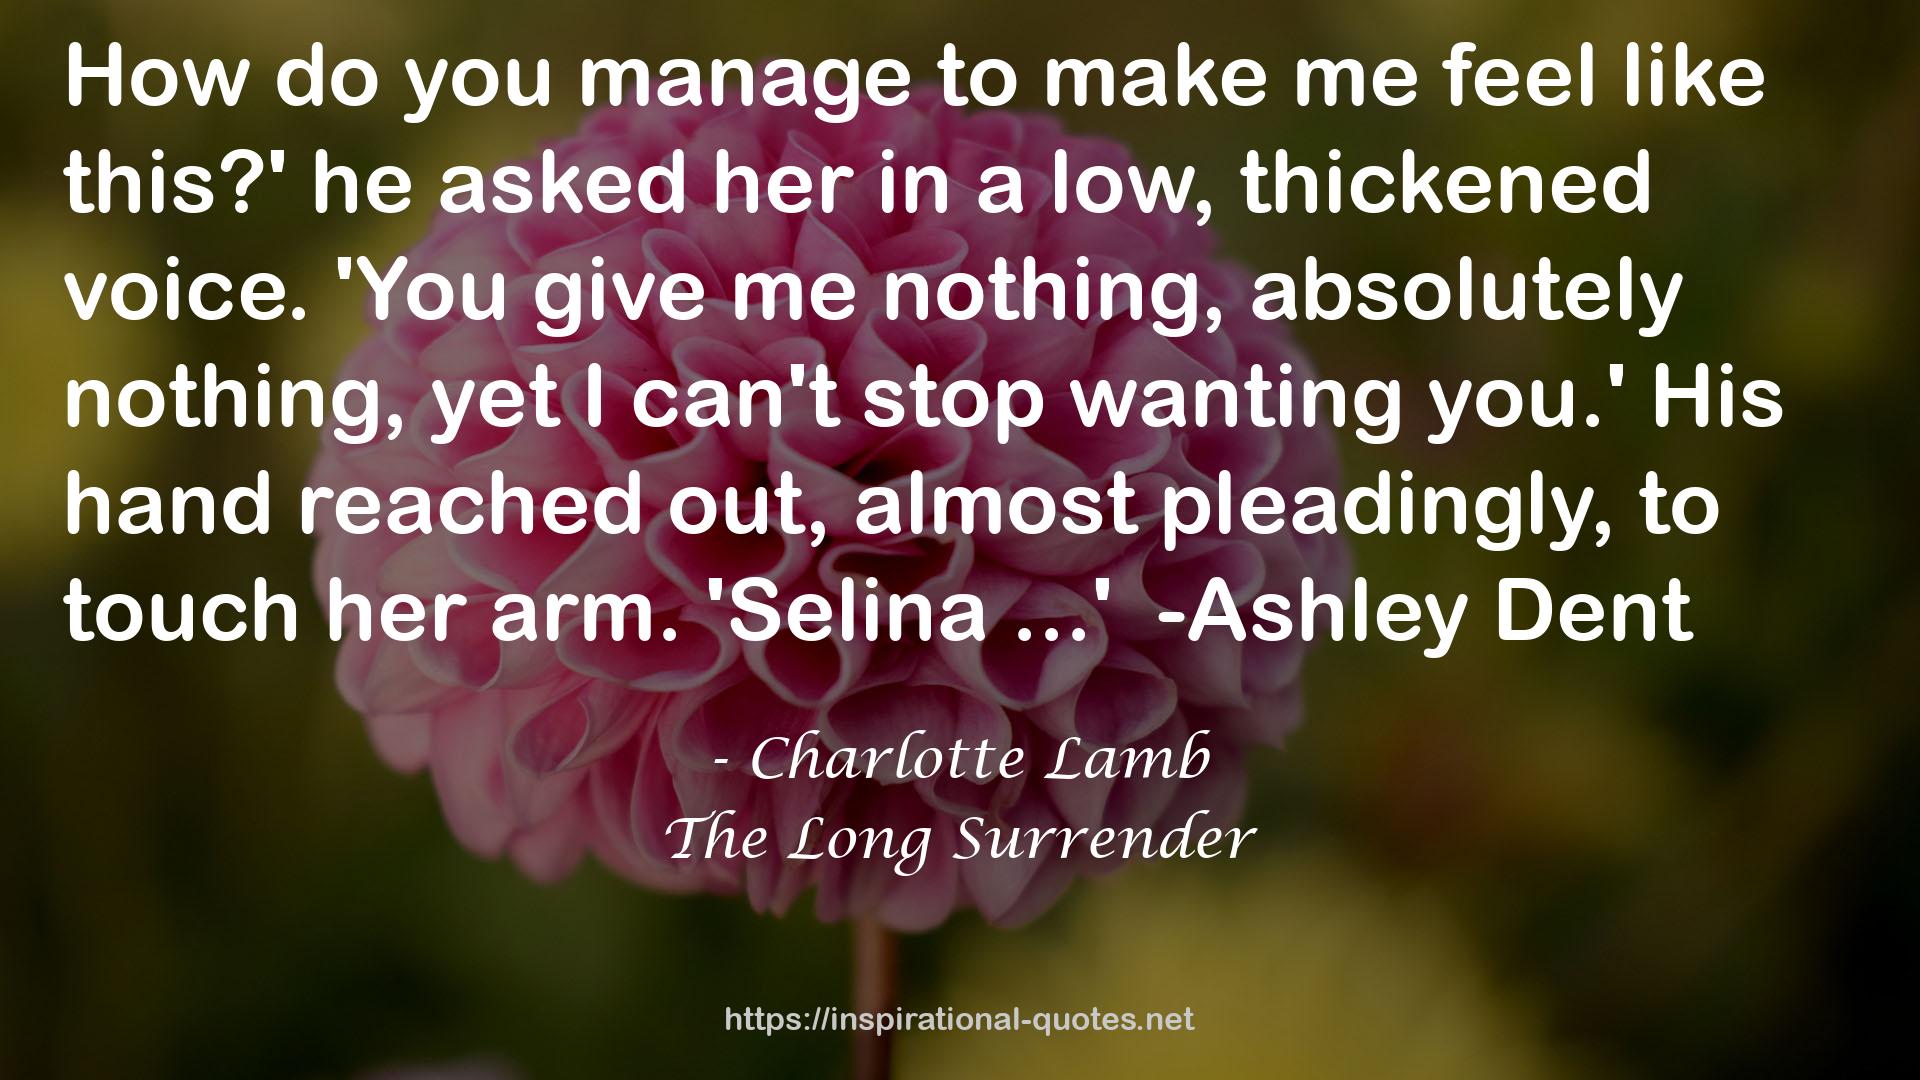 The Long Surrender QUOTES